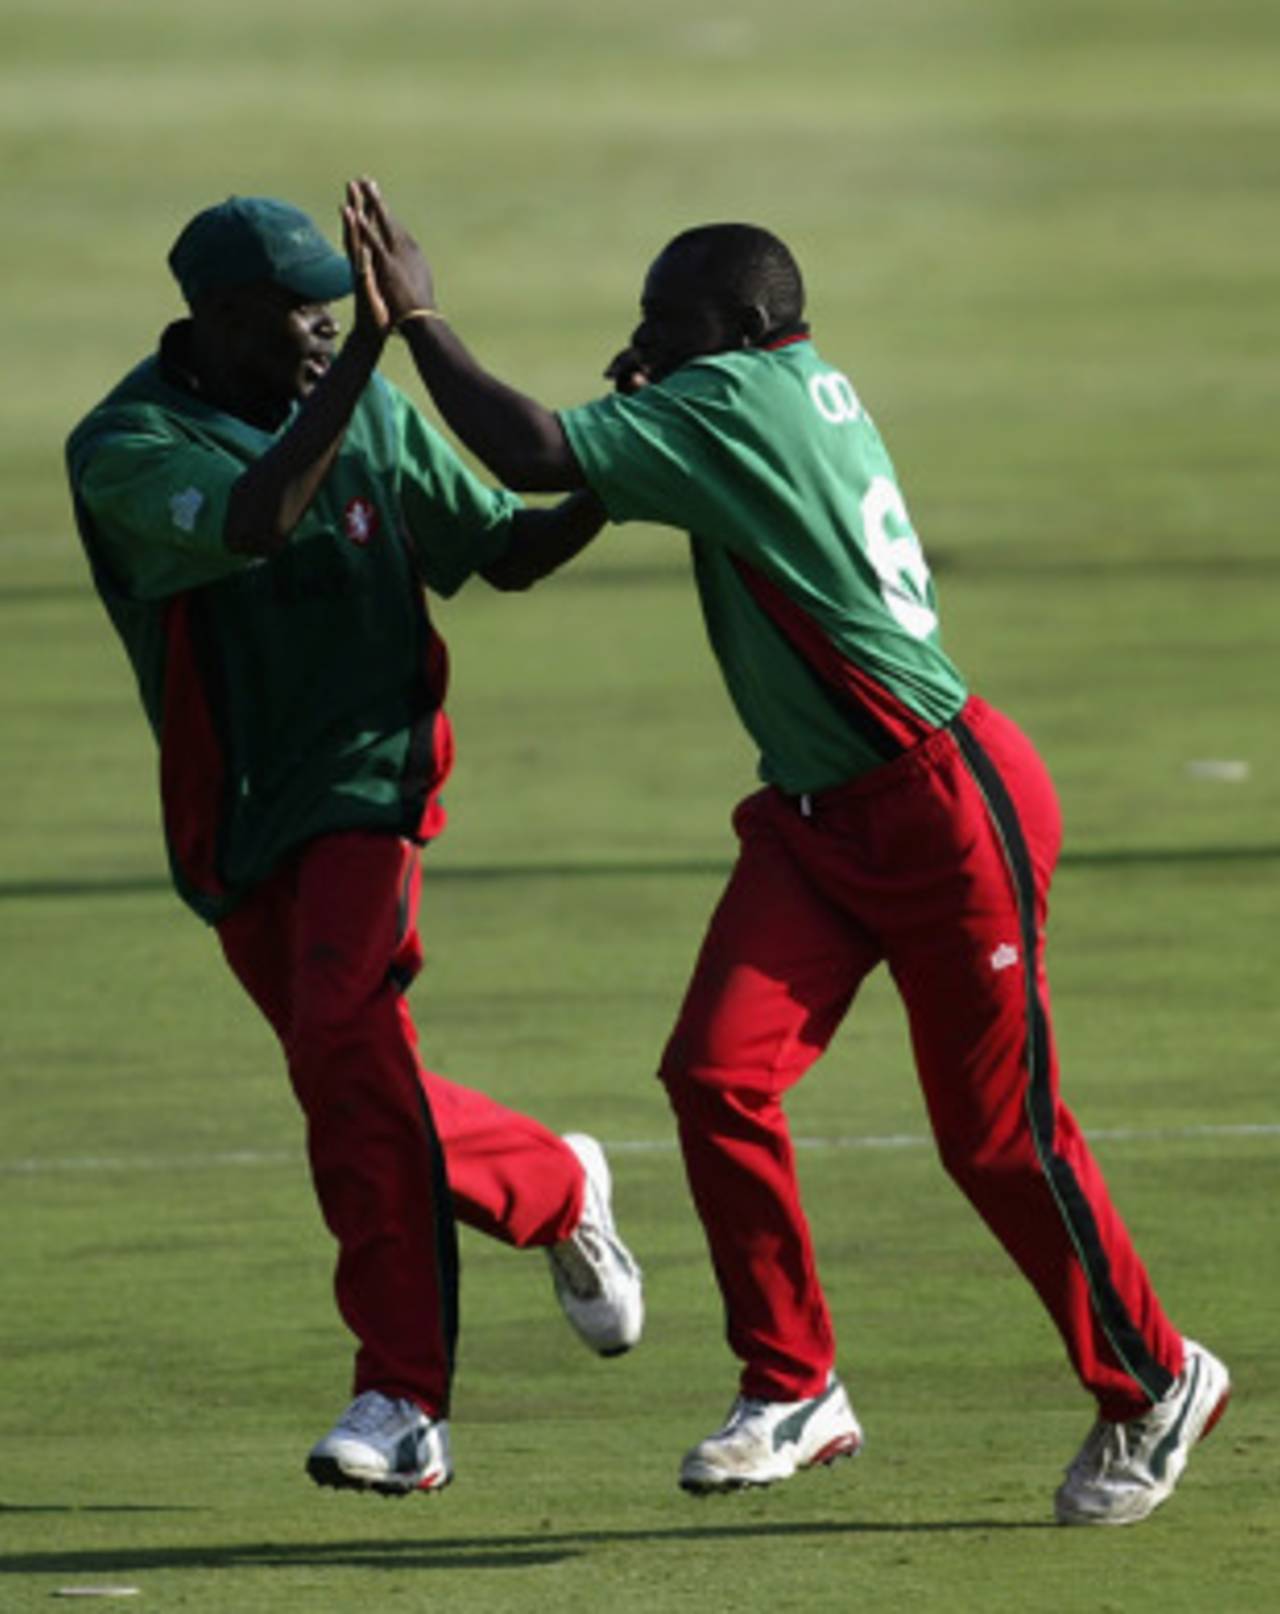 Maurice Odumbe and a team-mate celebrate a wicket during the 2003 World Cup